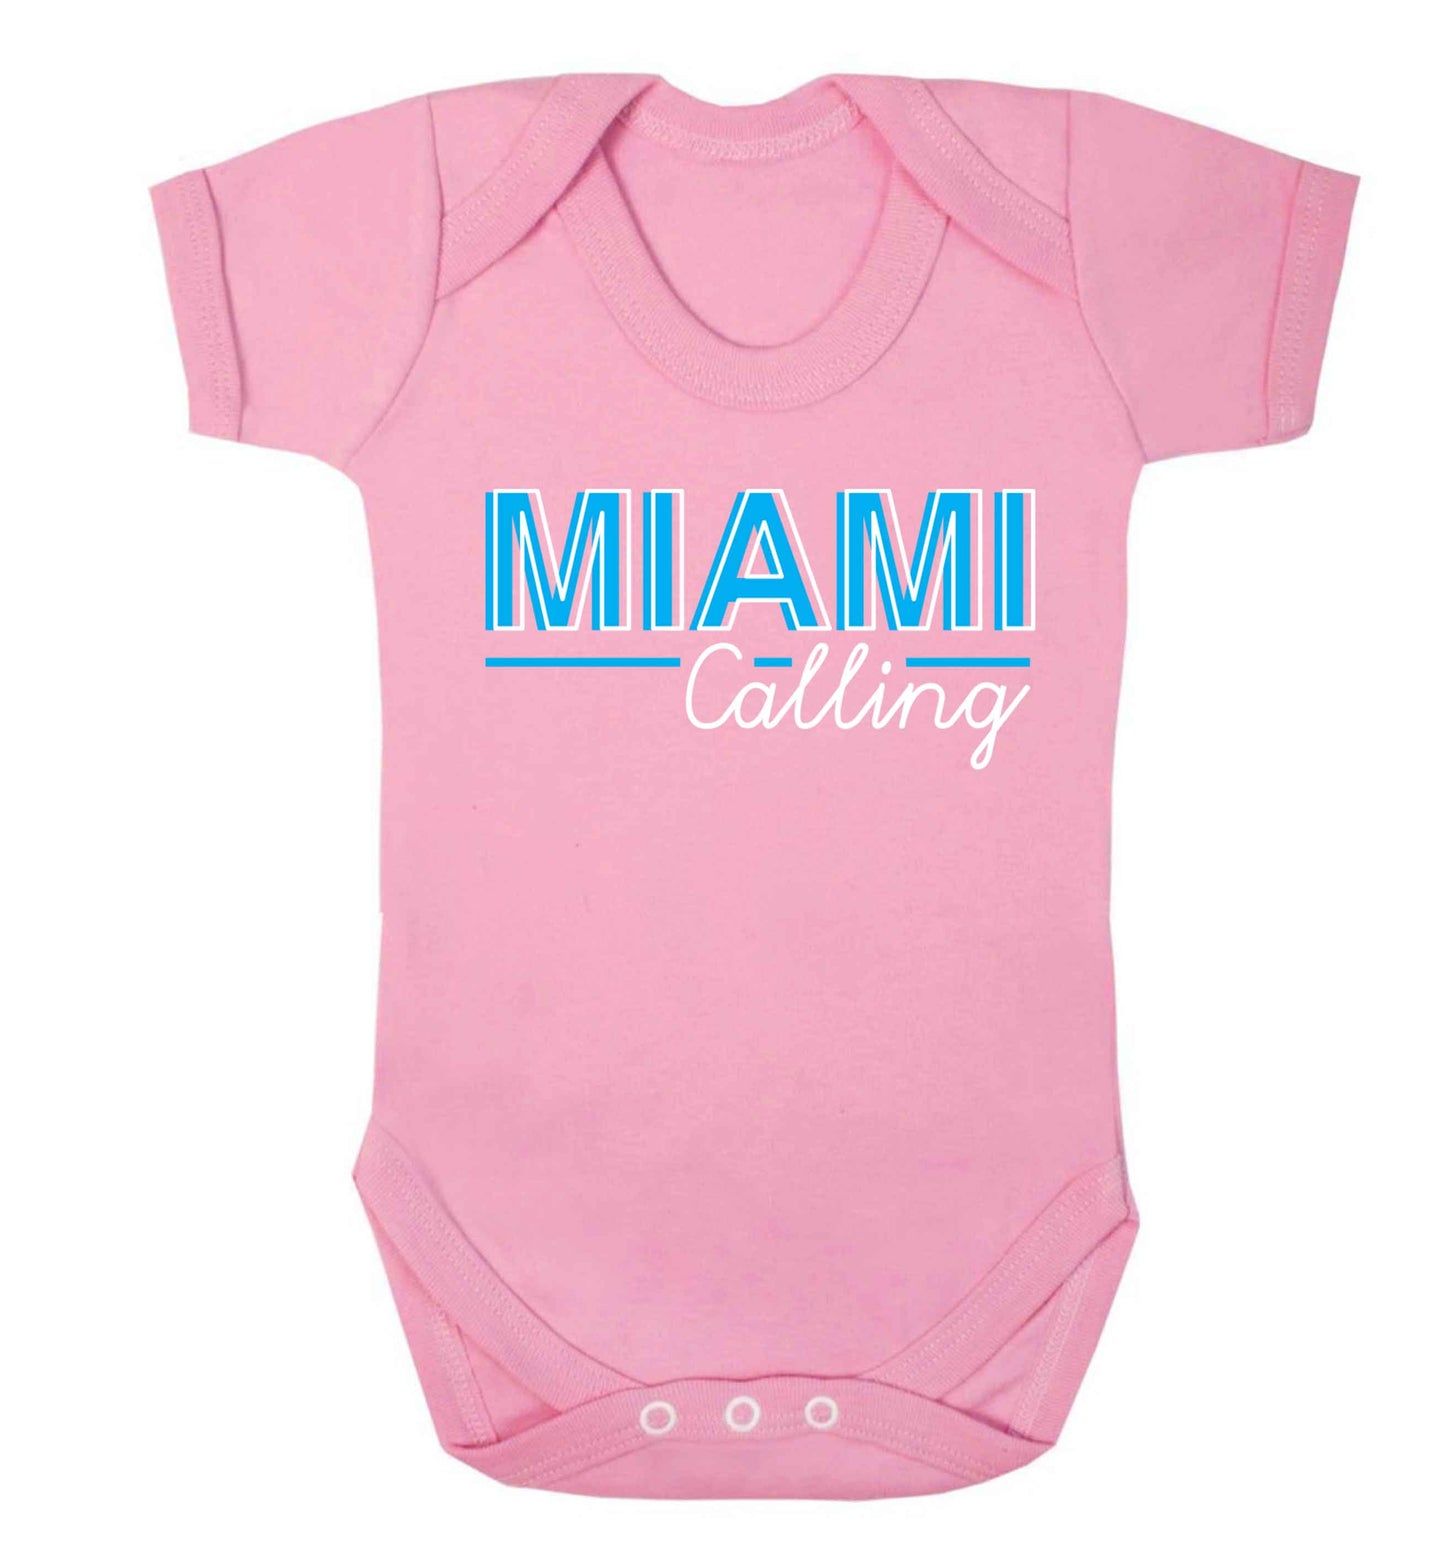 Miami calling Baby Vest pale pink 18-24 months